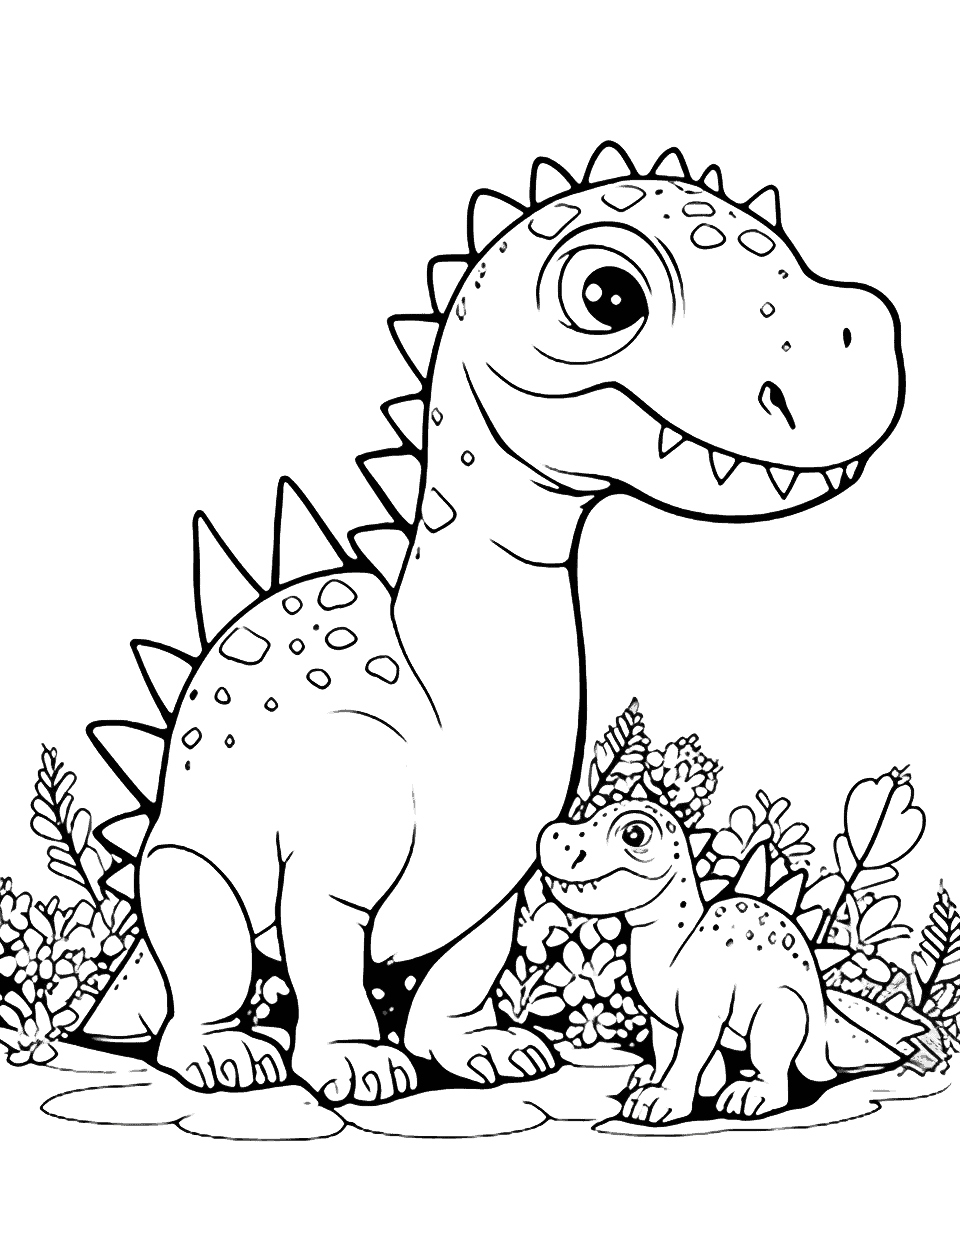 Baby Dino and Parent Coloring Page - A baby dinosaur interacting with its parent in a touching scene.